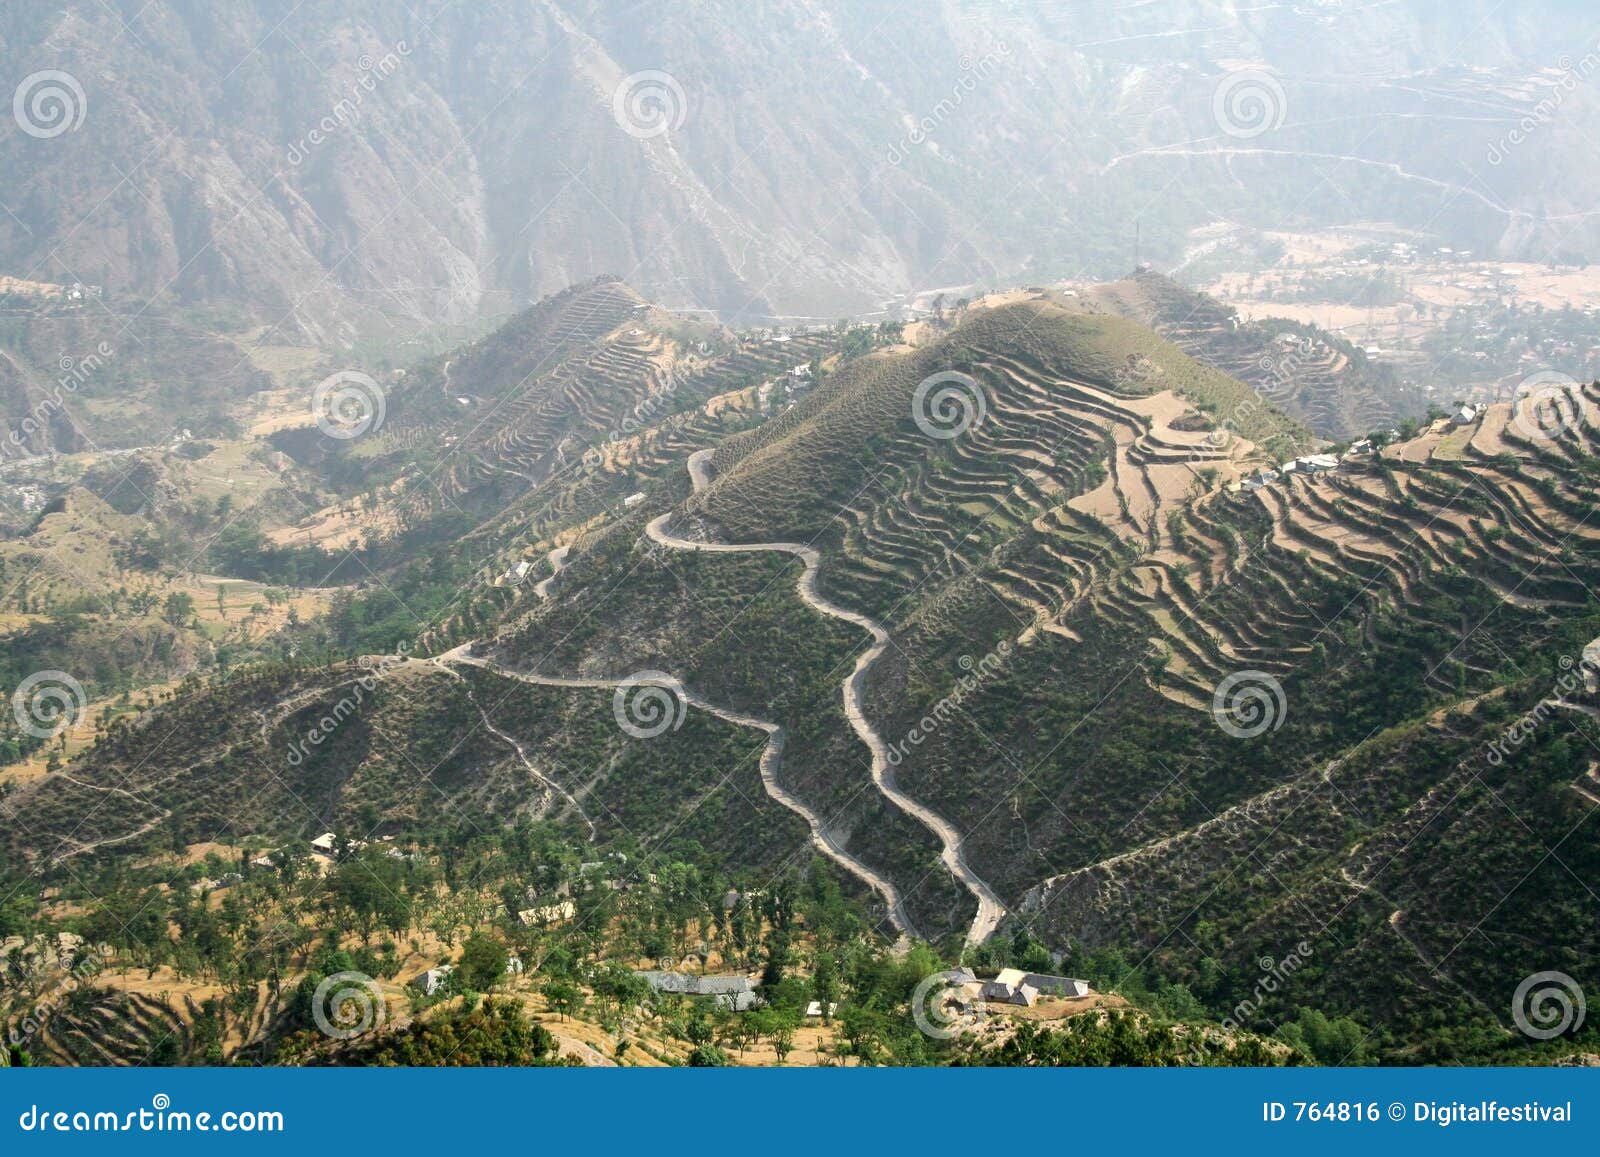 aerial view of remote region in himachal india